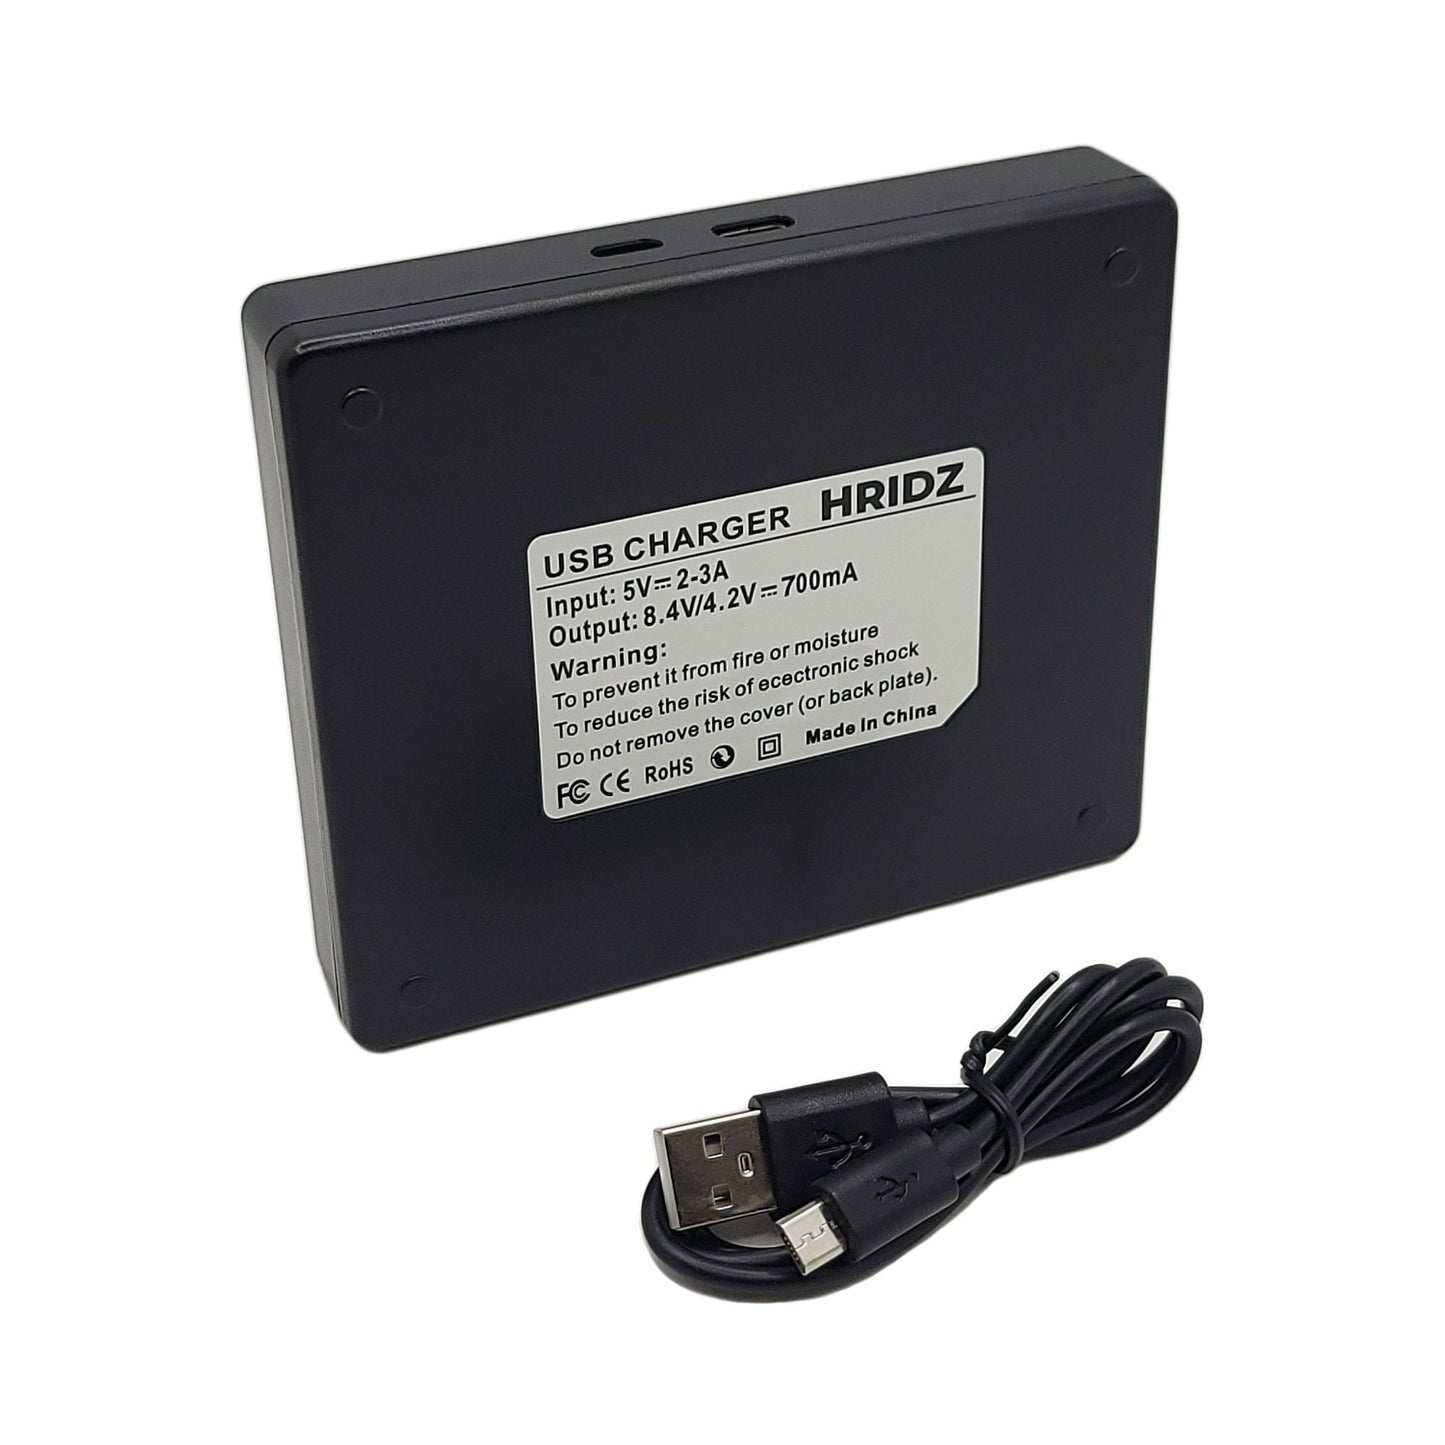 Hridz BP-511 Dual Charger For CANON BP511 PowerShot G1 G2 G3 G5 G6 RPO 90 IS